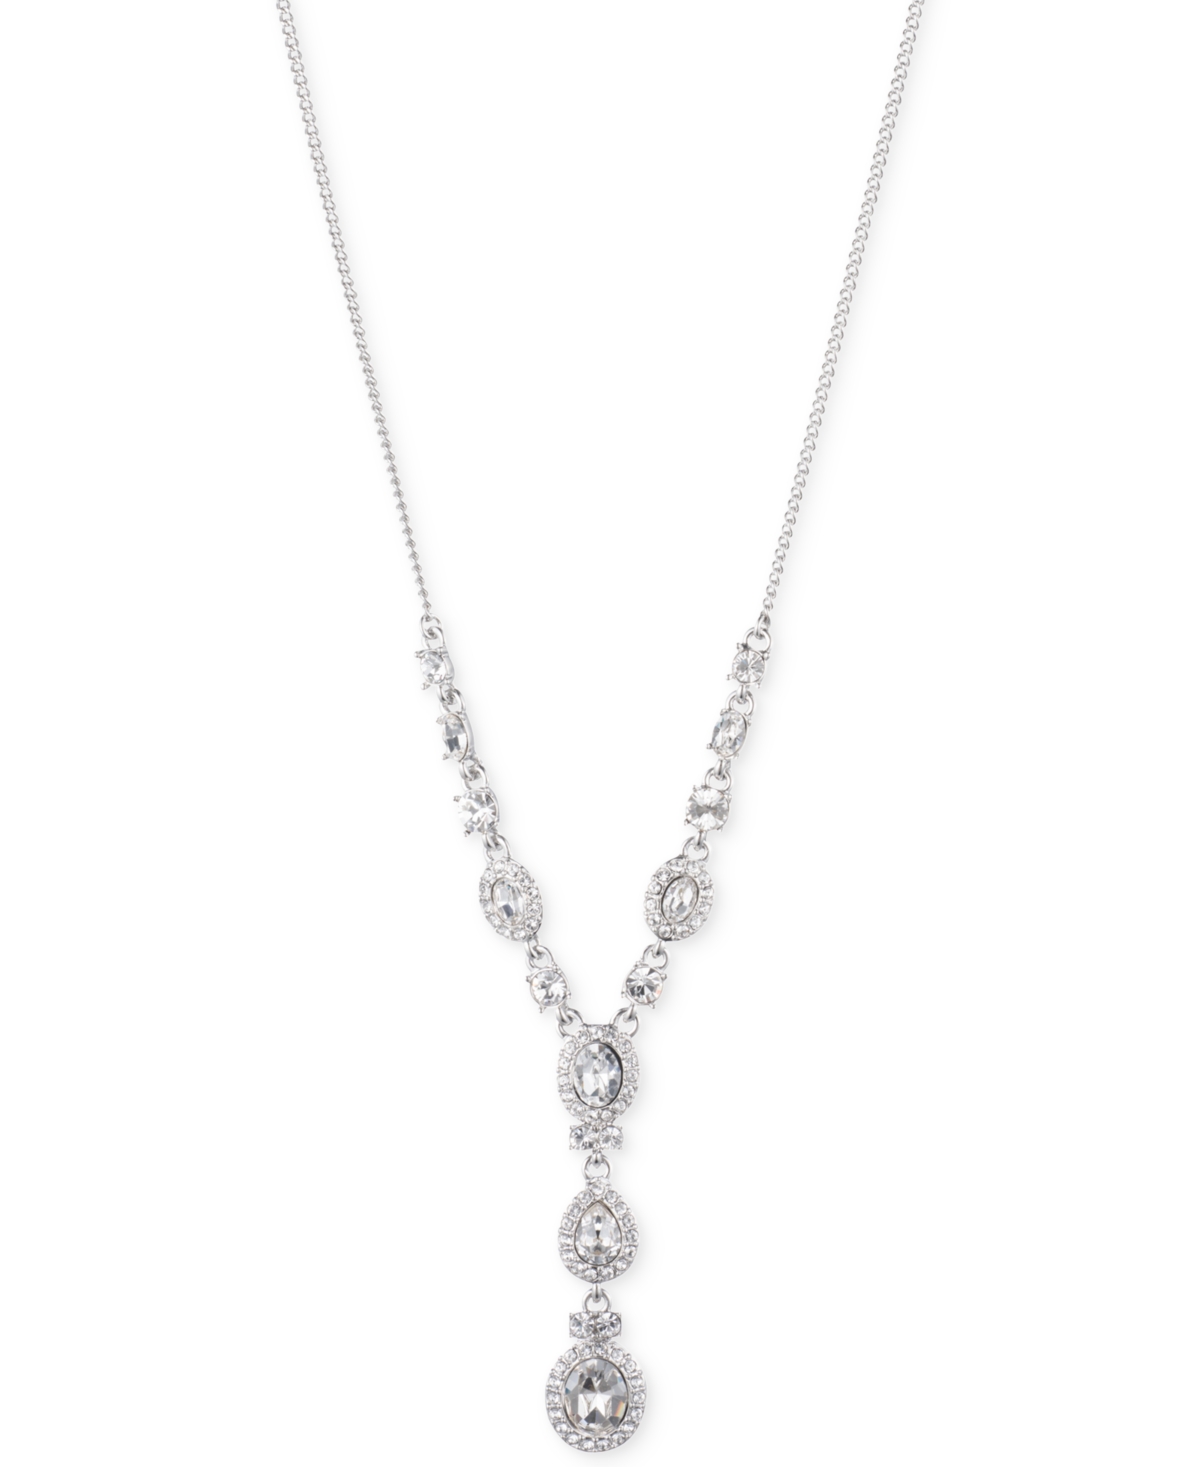 Multi-Crystal and Pave Y-Neck Necklace - Silver